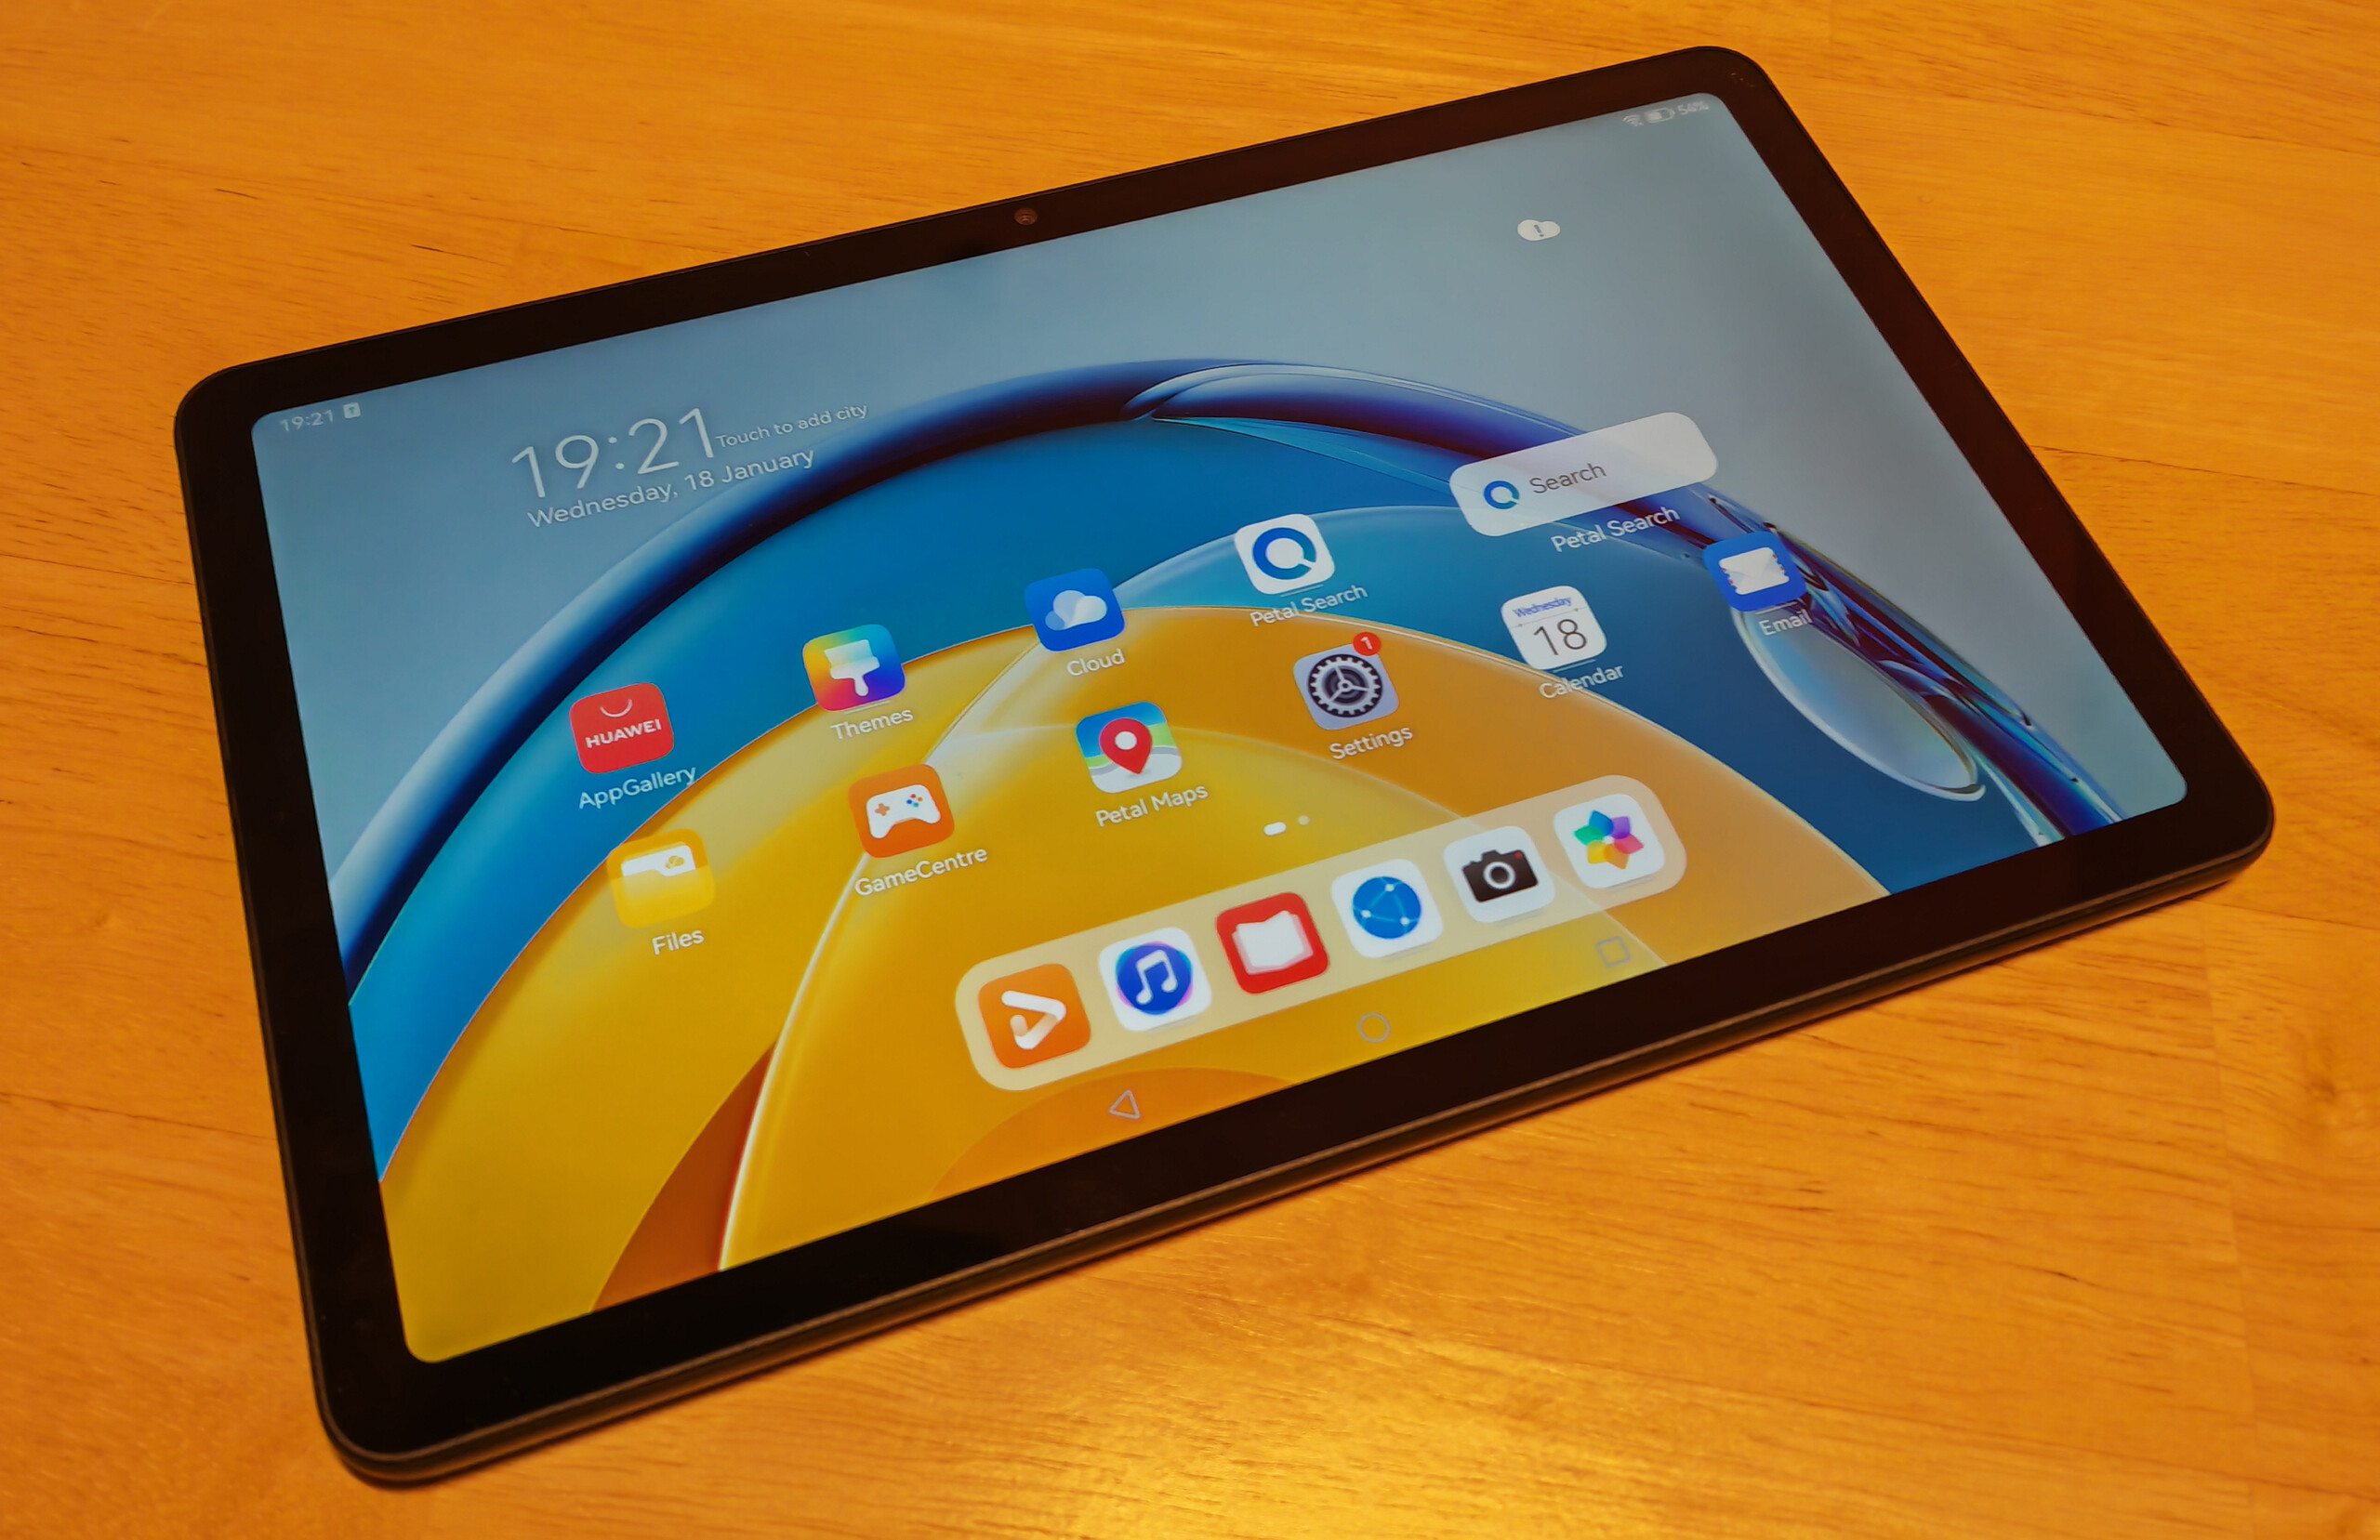 Huawei MatePad SE tablet review - Small price, small battery -   Reviews